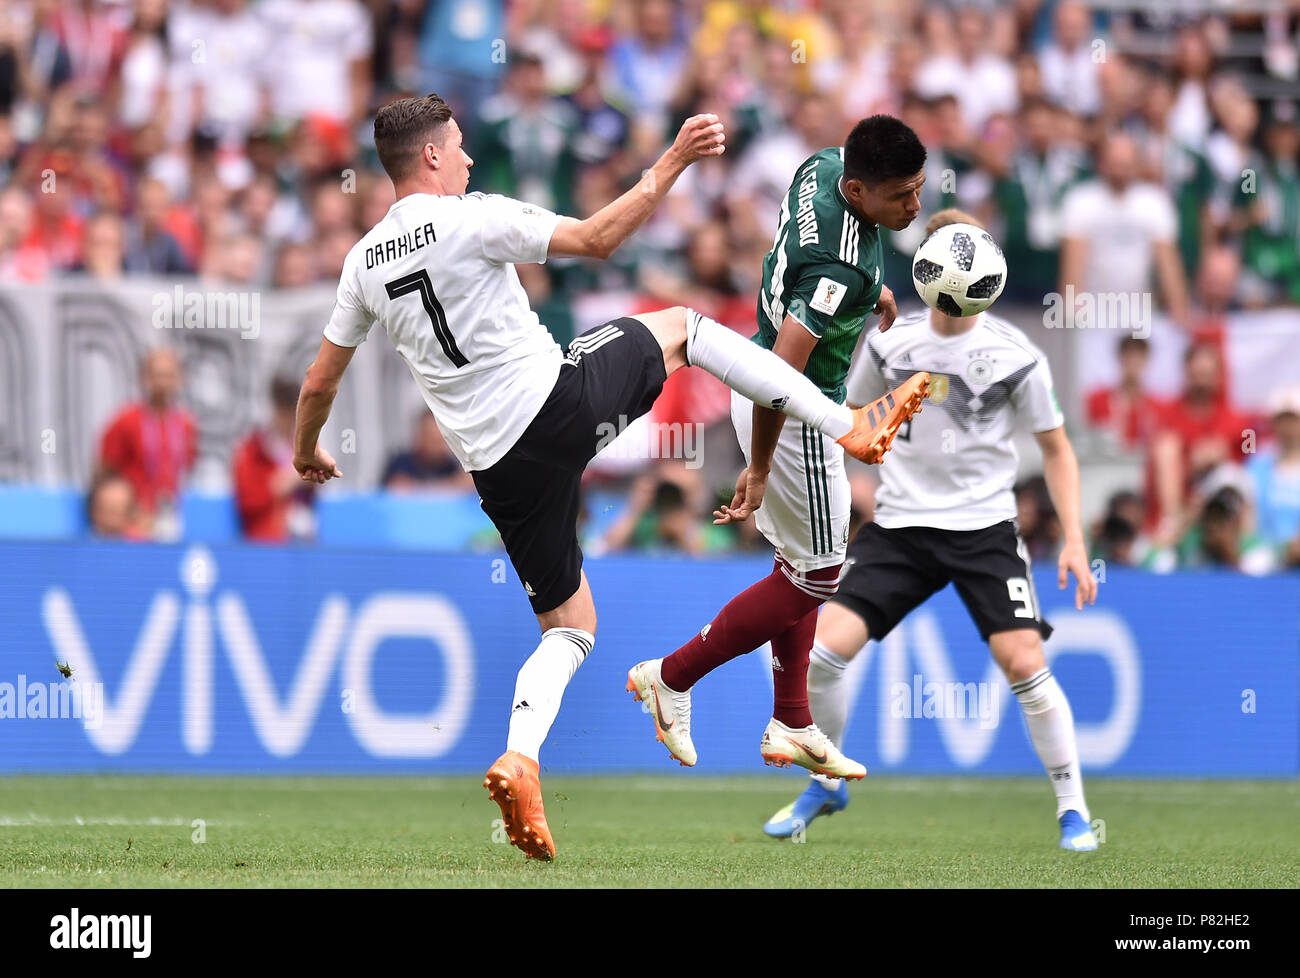 MOSCOW, RUSSIA - JUNE 17: Julian Draxler of Germany in action during the 2018 FIFA World Cup Russia group F match between Germany and Mexico at Luzhniki Stadium on June 17, 2018 in Moscow, Russia. (Photo by Lukasz Laskowski/PressFocus/MB Media) Stock Photo